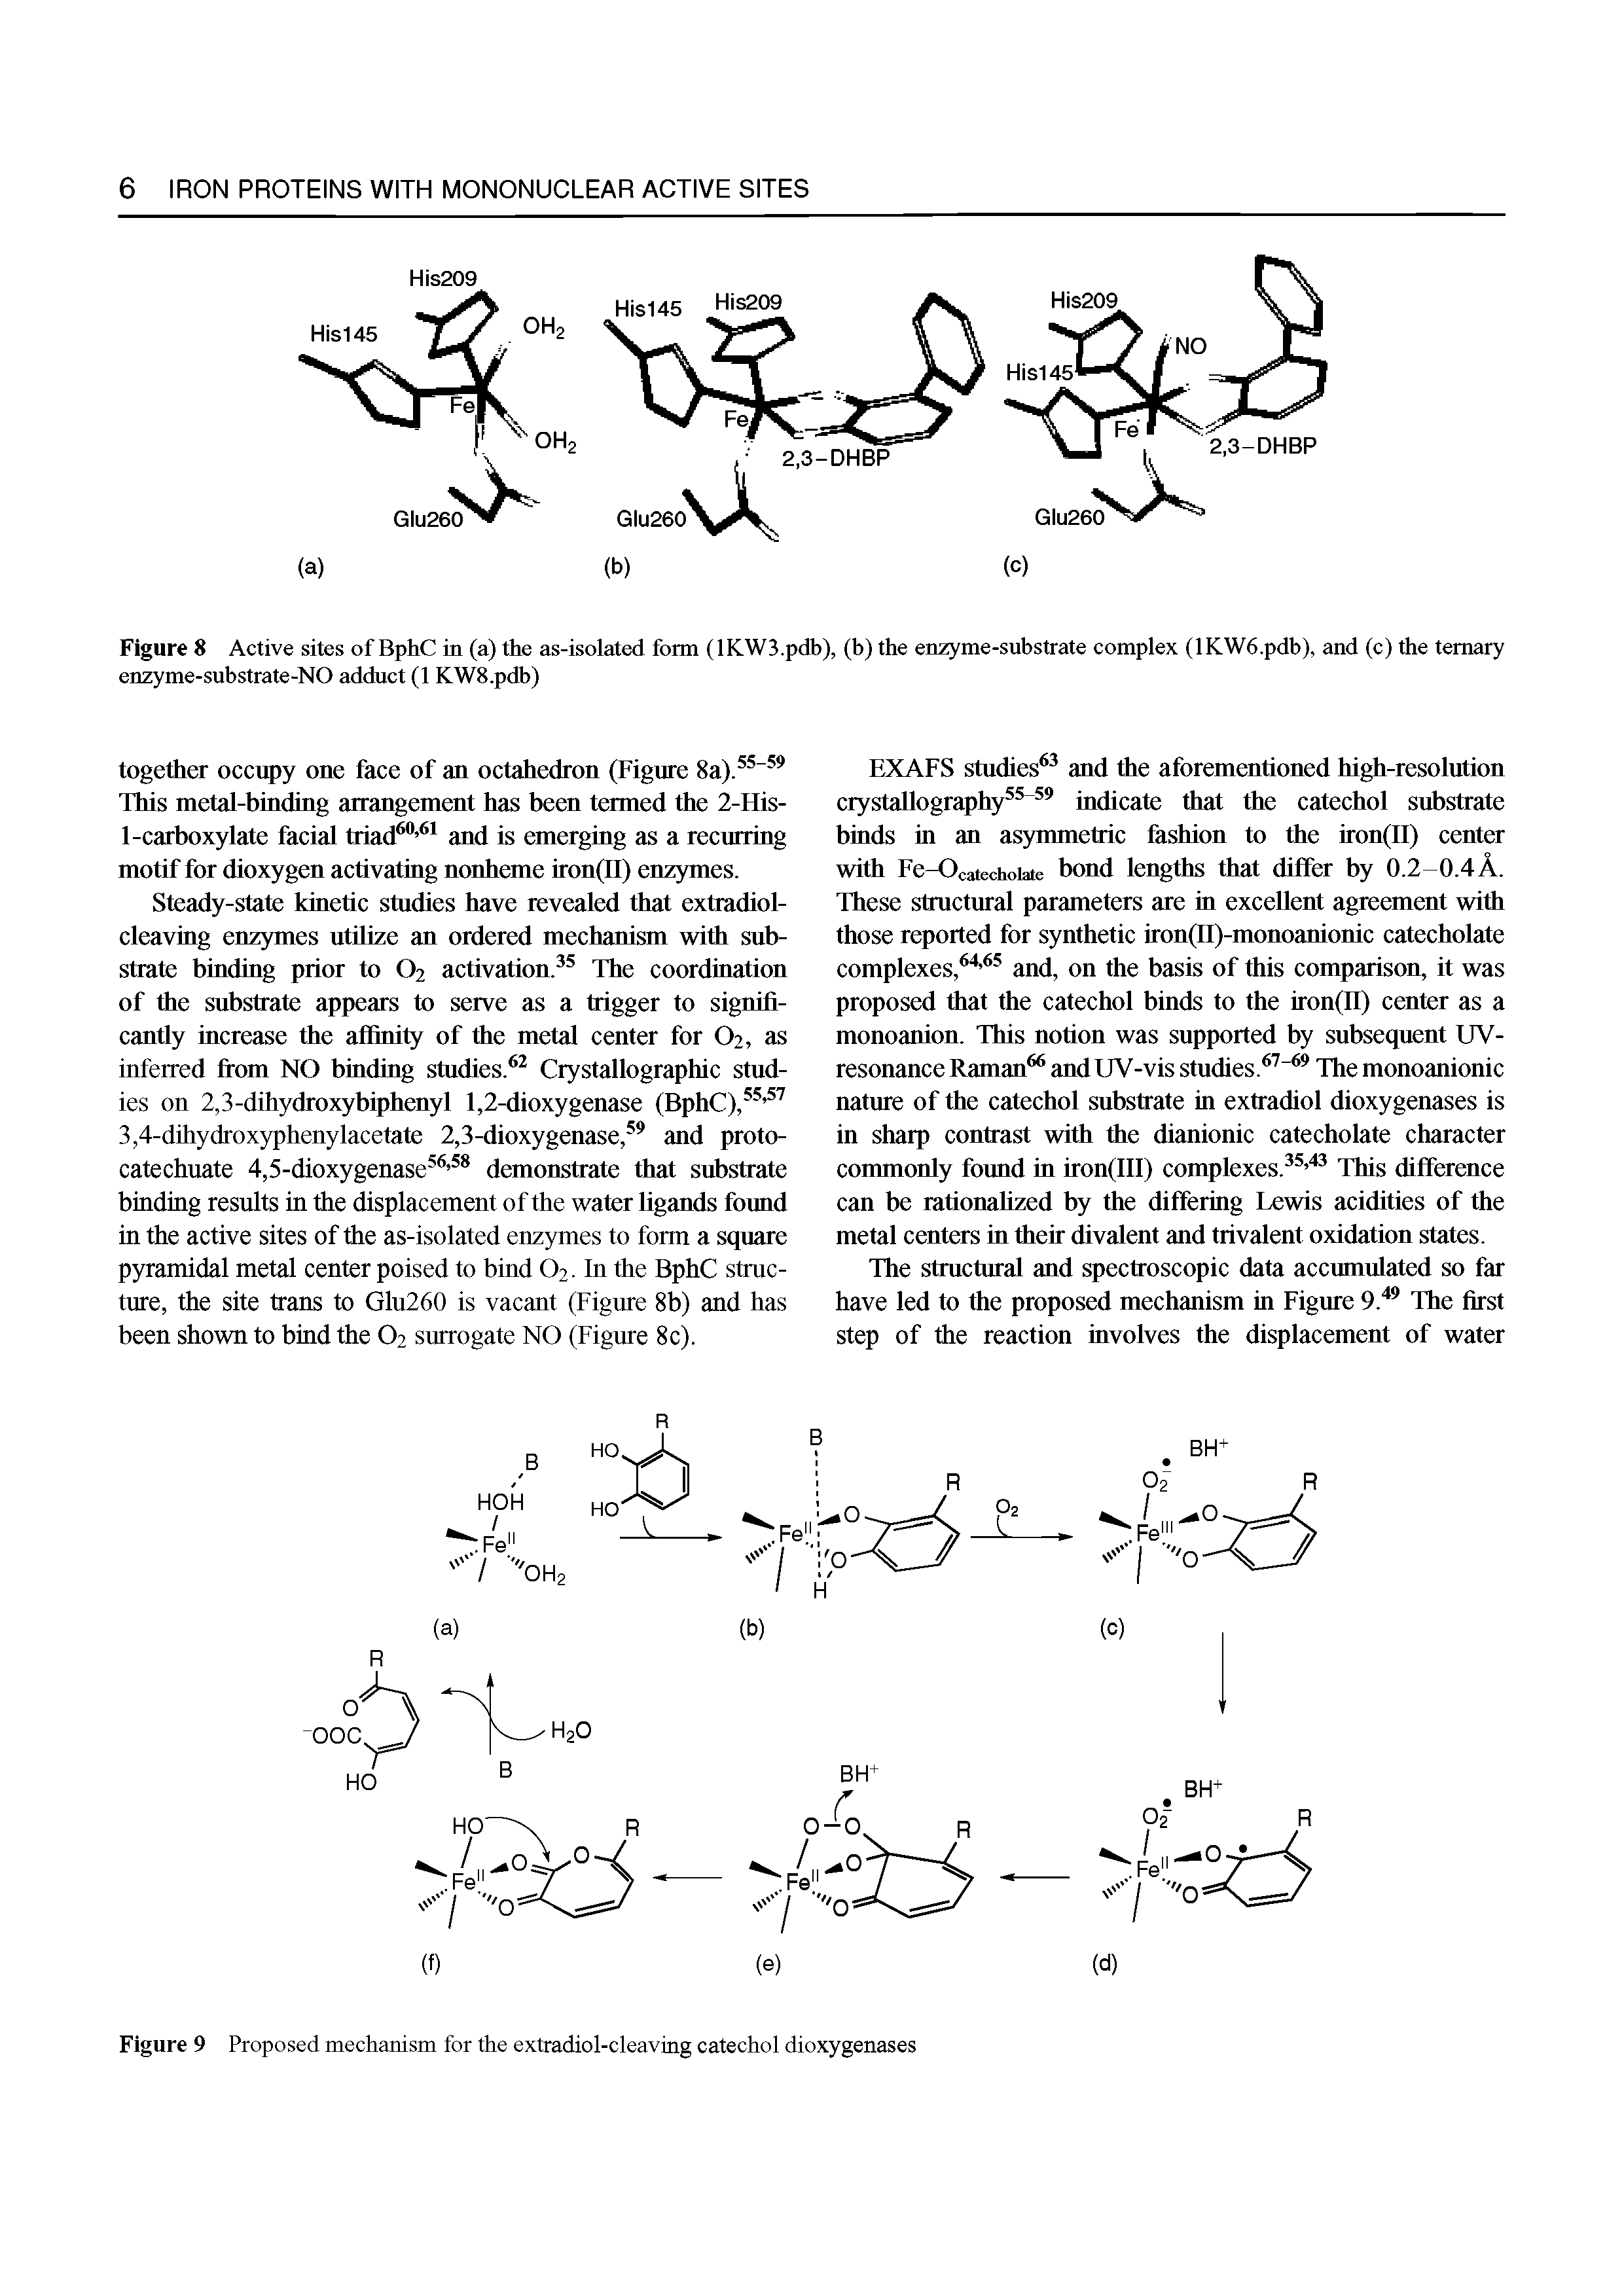 Figure 9 Proposed mechanism for the extradiol-cleaving catechol dioxygenases...